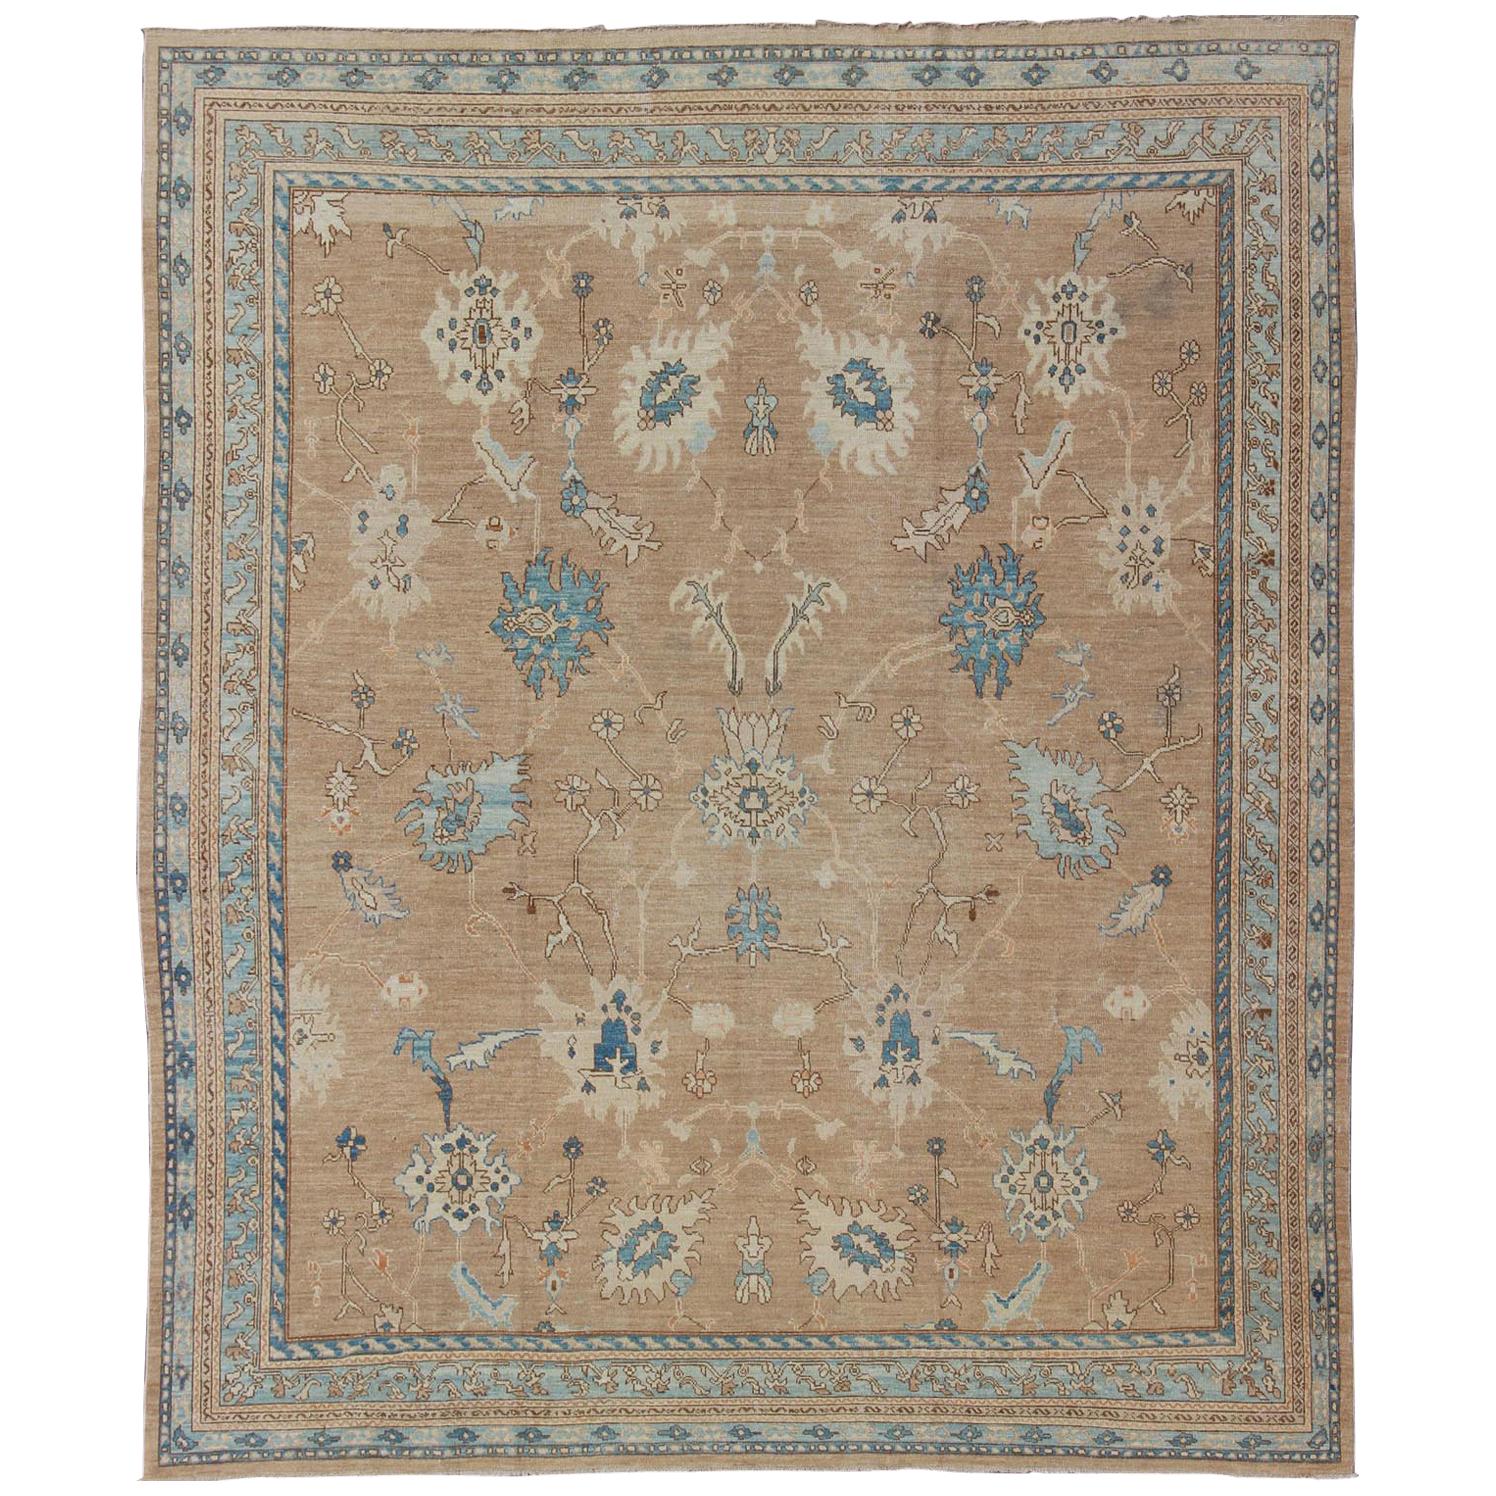 Squared Shape Vintage Oushak Rug With Tan, Blue and Neutral Colors